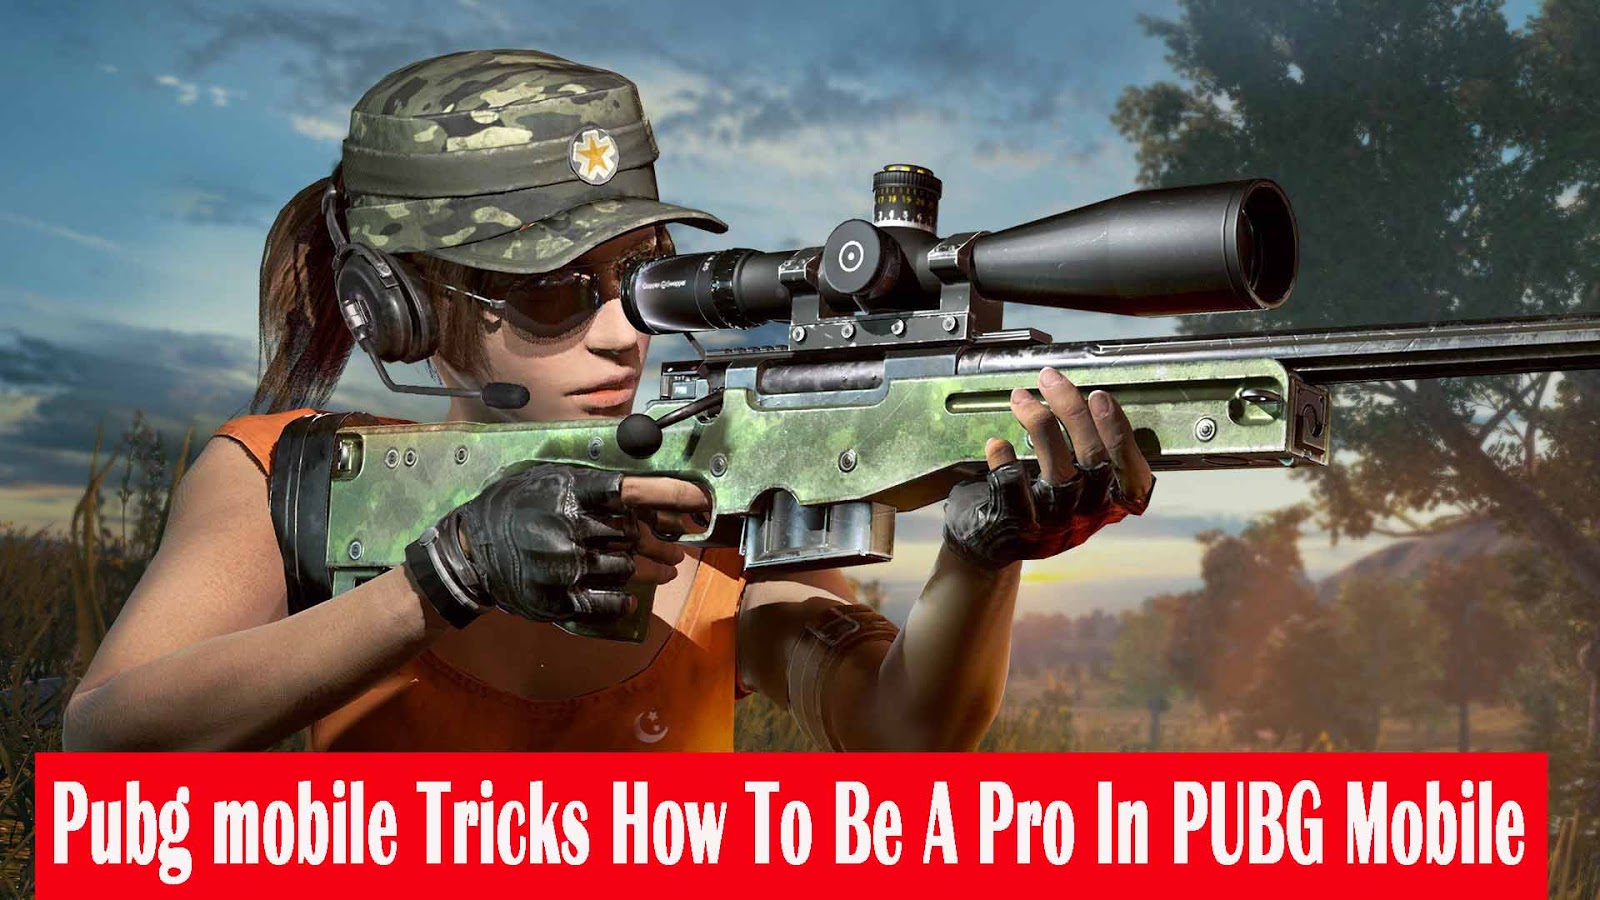 PUBG Tips & Tricks | How To Be A Pro In PUBG Mobile 2019 ... - 